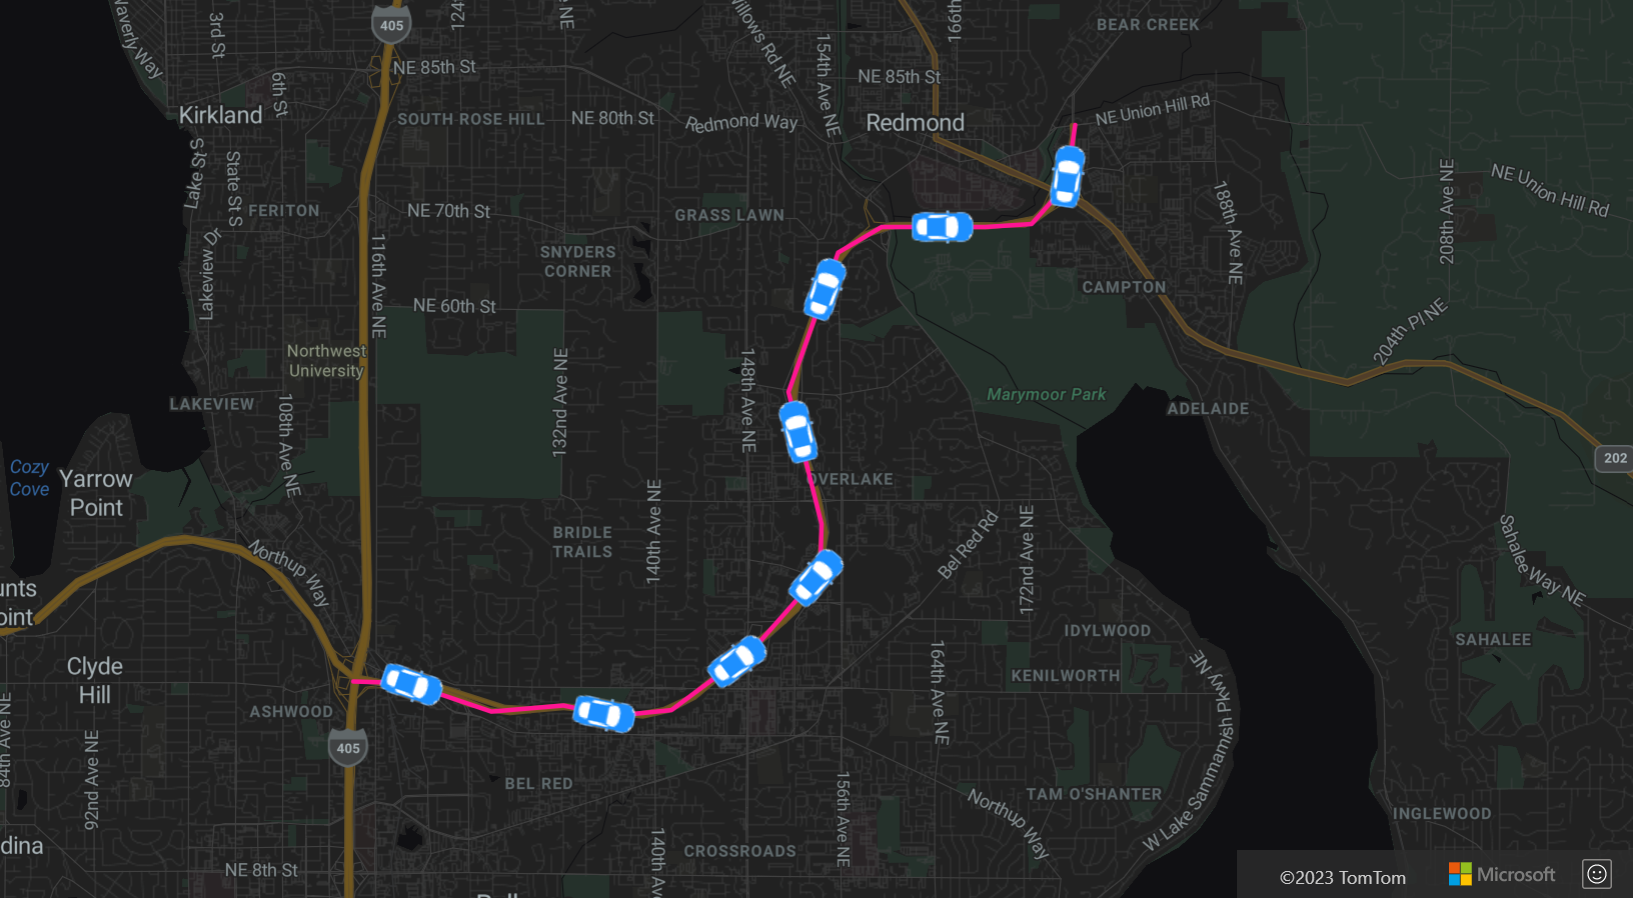 Screenshot showing a map displaying a line layer marking the route with car icons along the route.